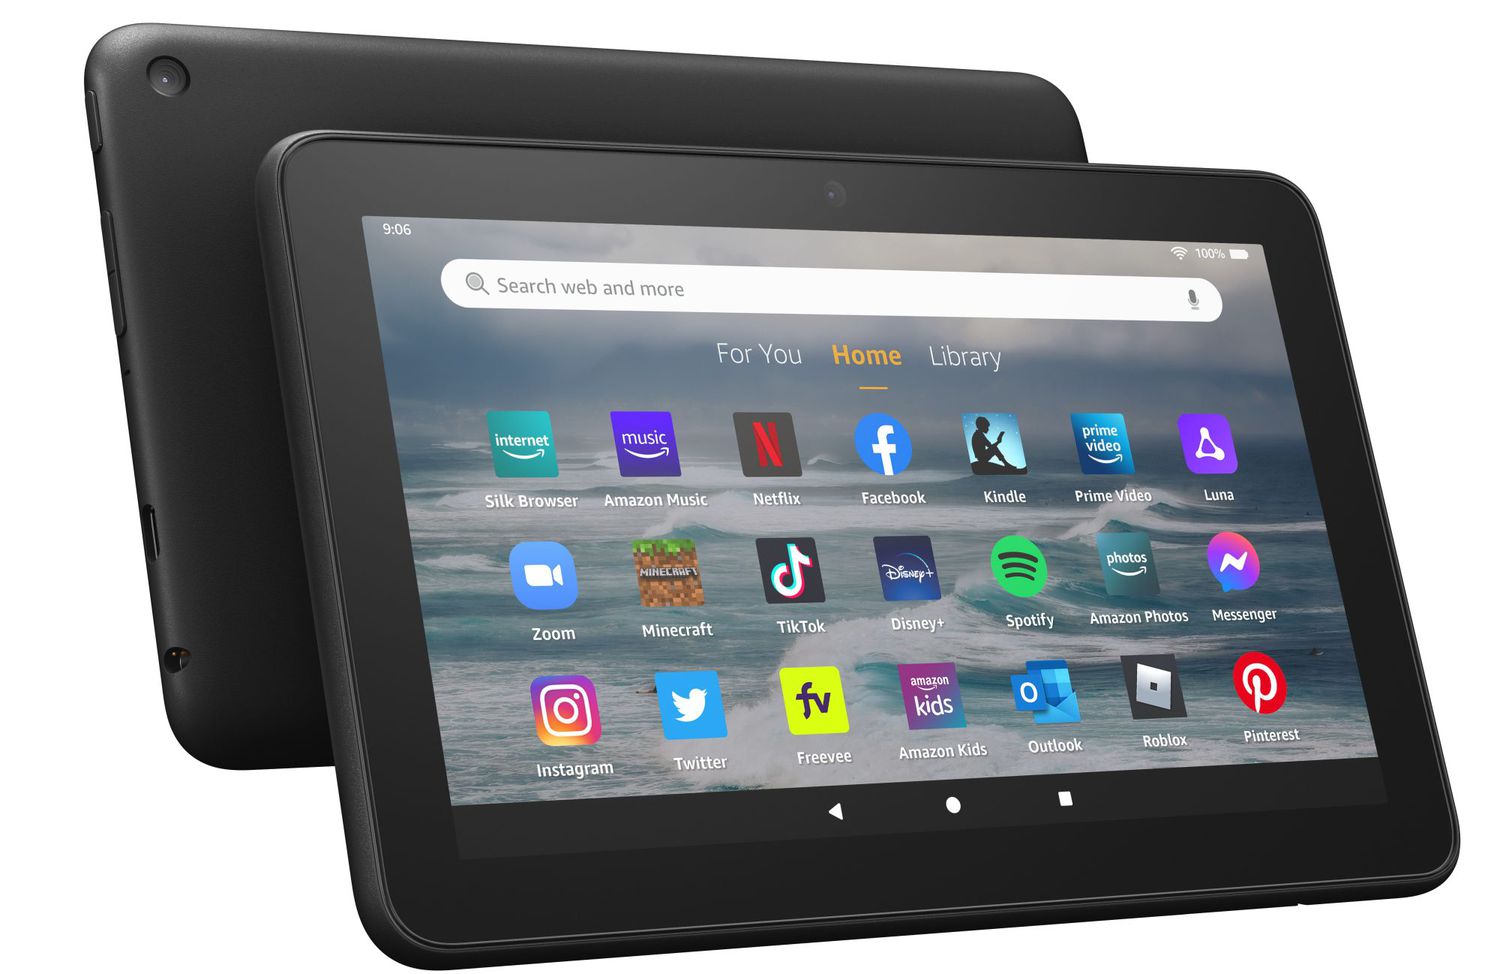 How to change language on Amazon Fire tablet